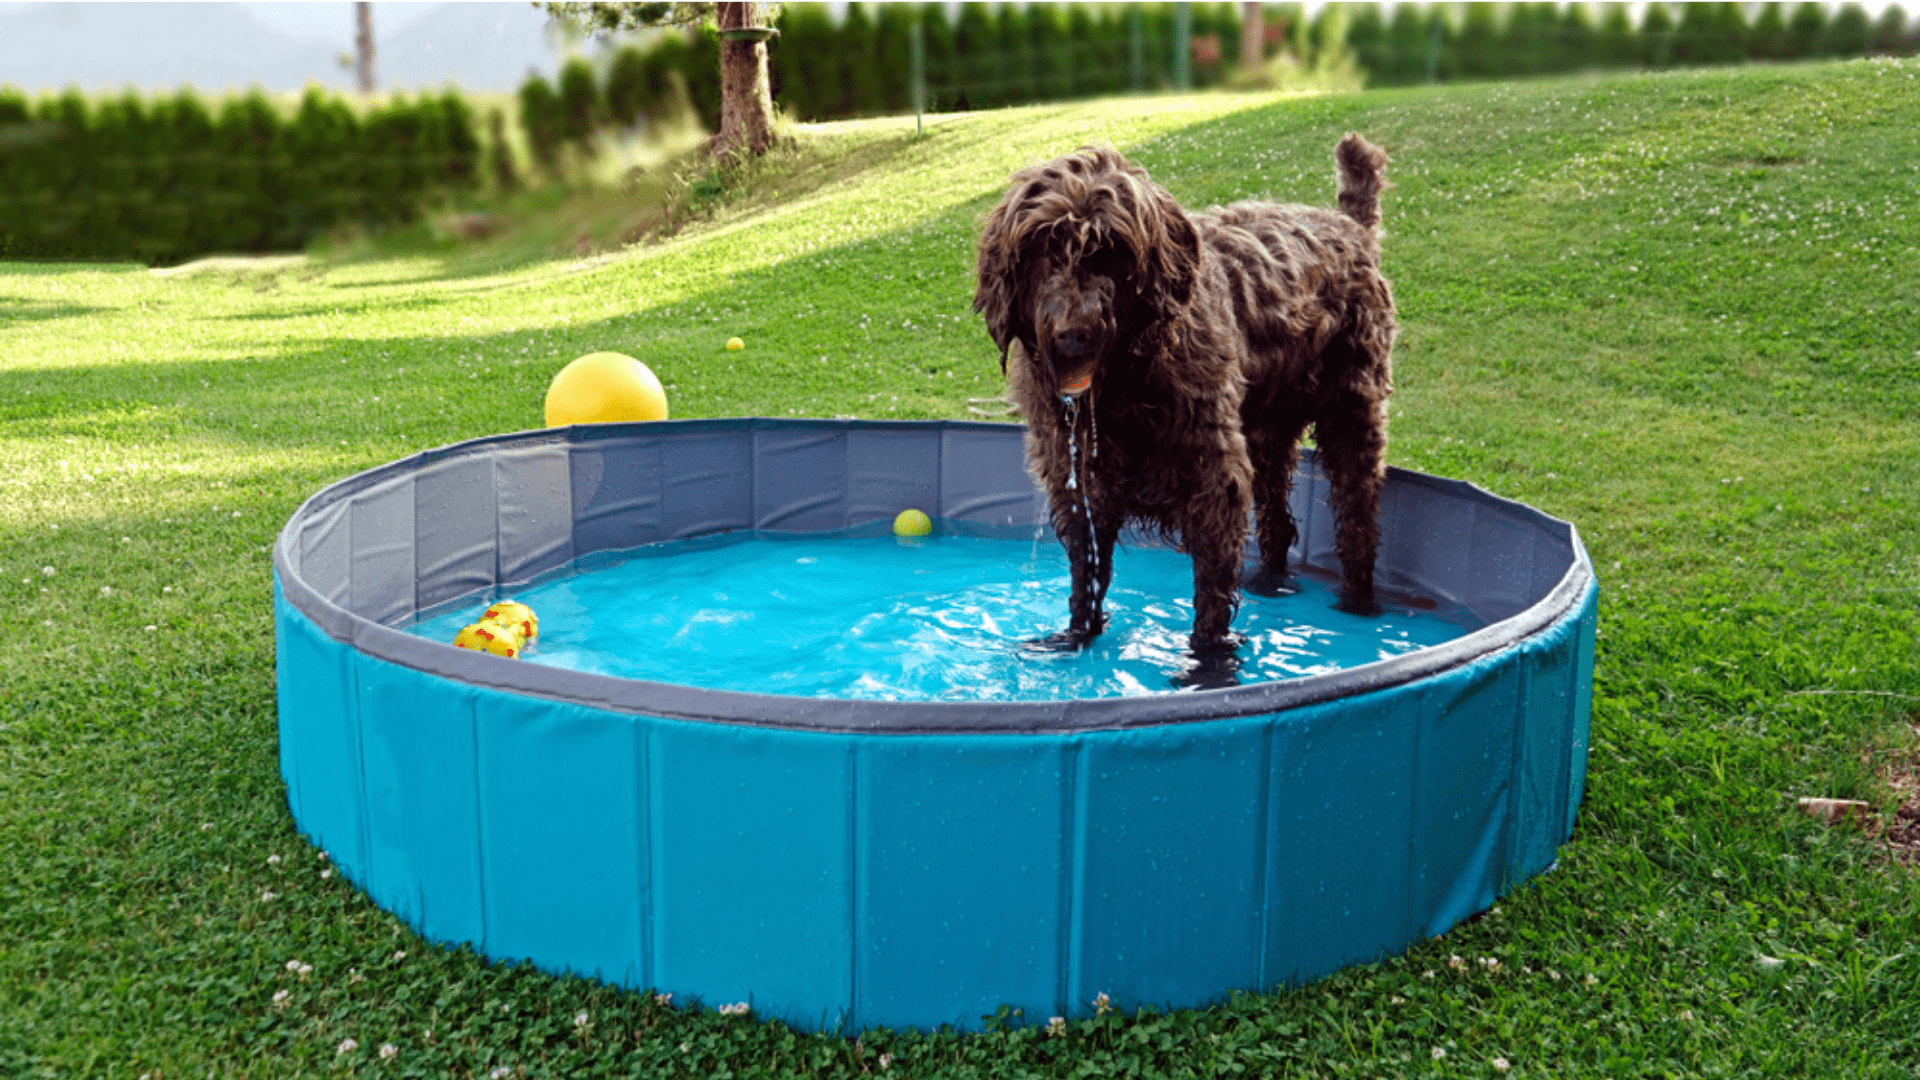 Invest in a children's or dog-friendly pool (Image: Reproduction/Shutterstock)